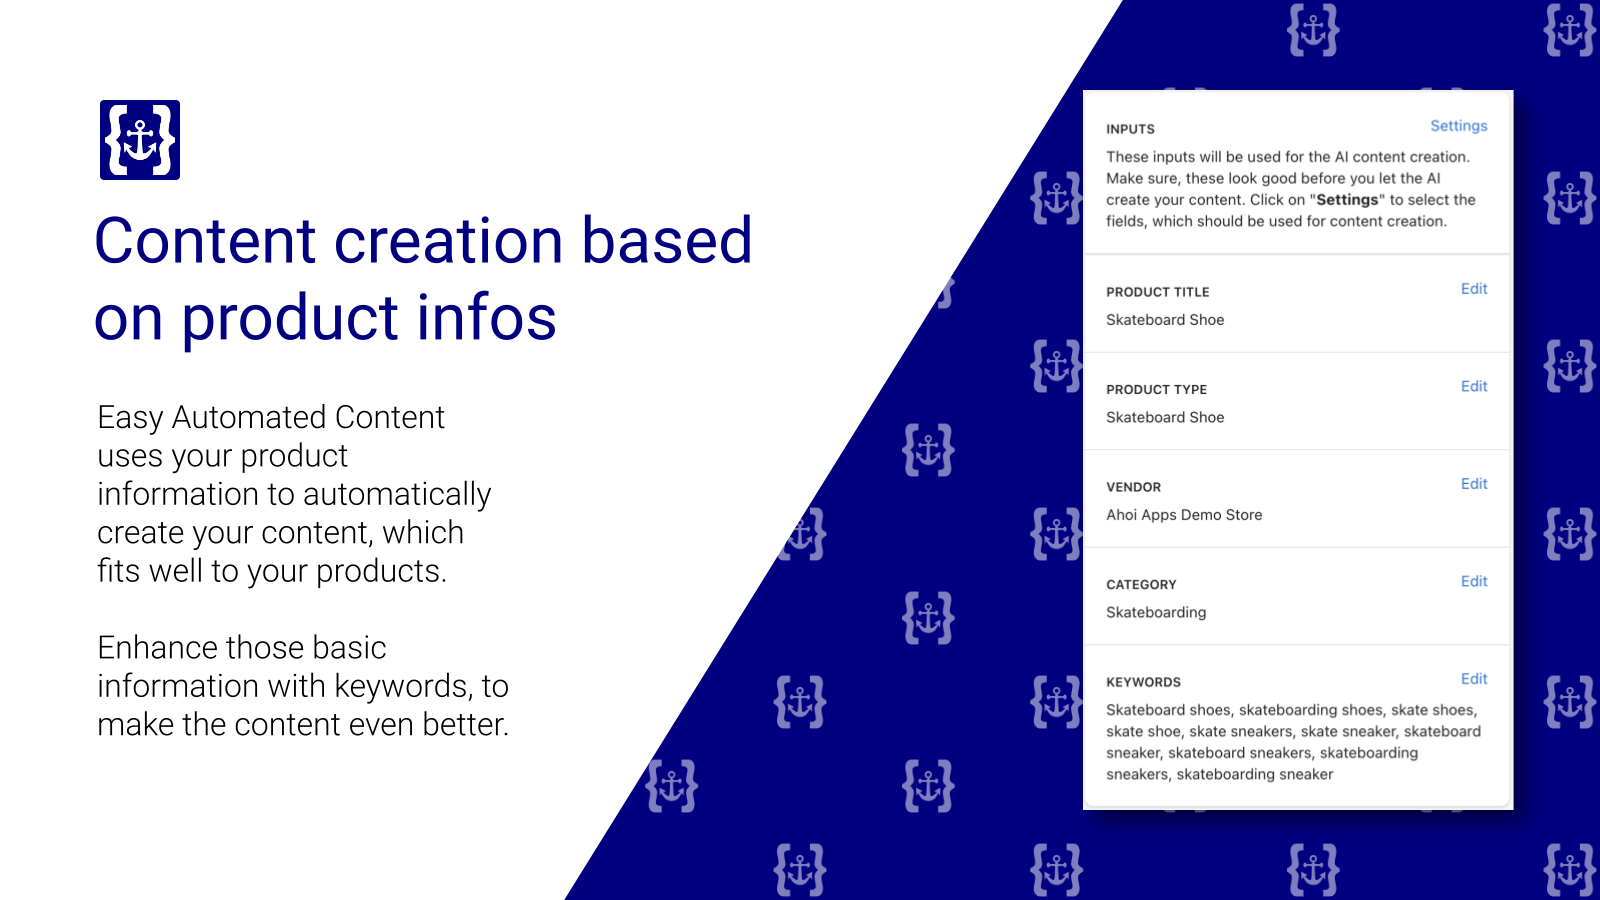 Content creation based on product infos.